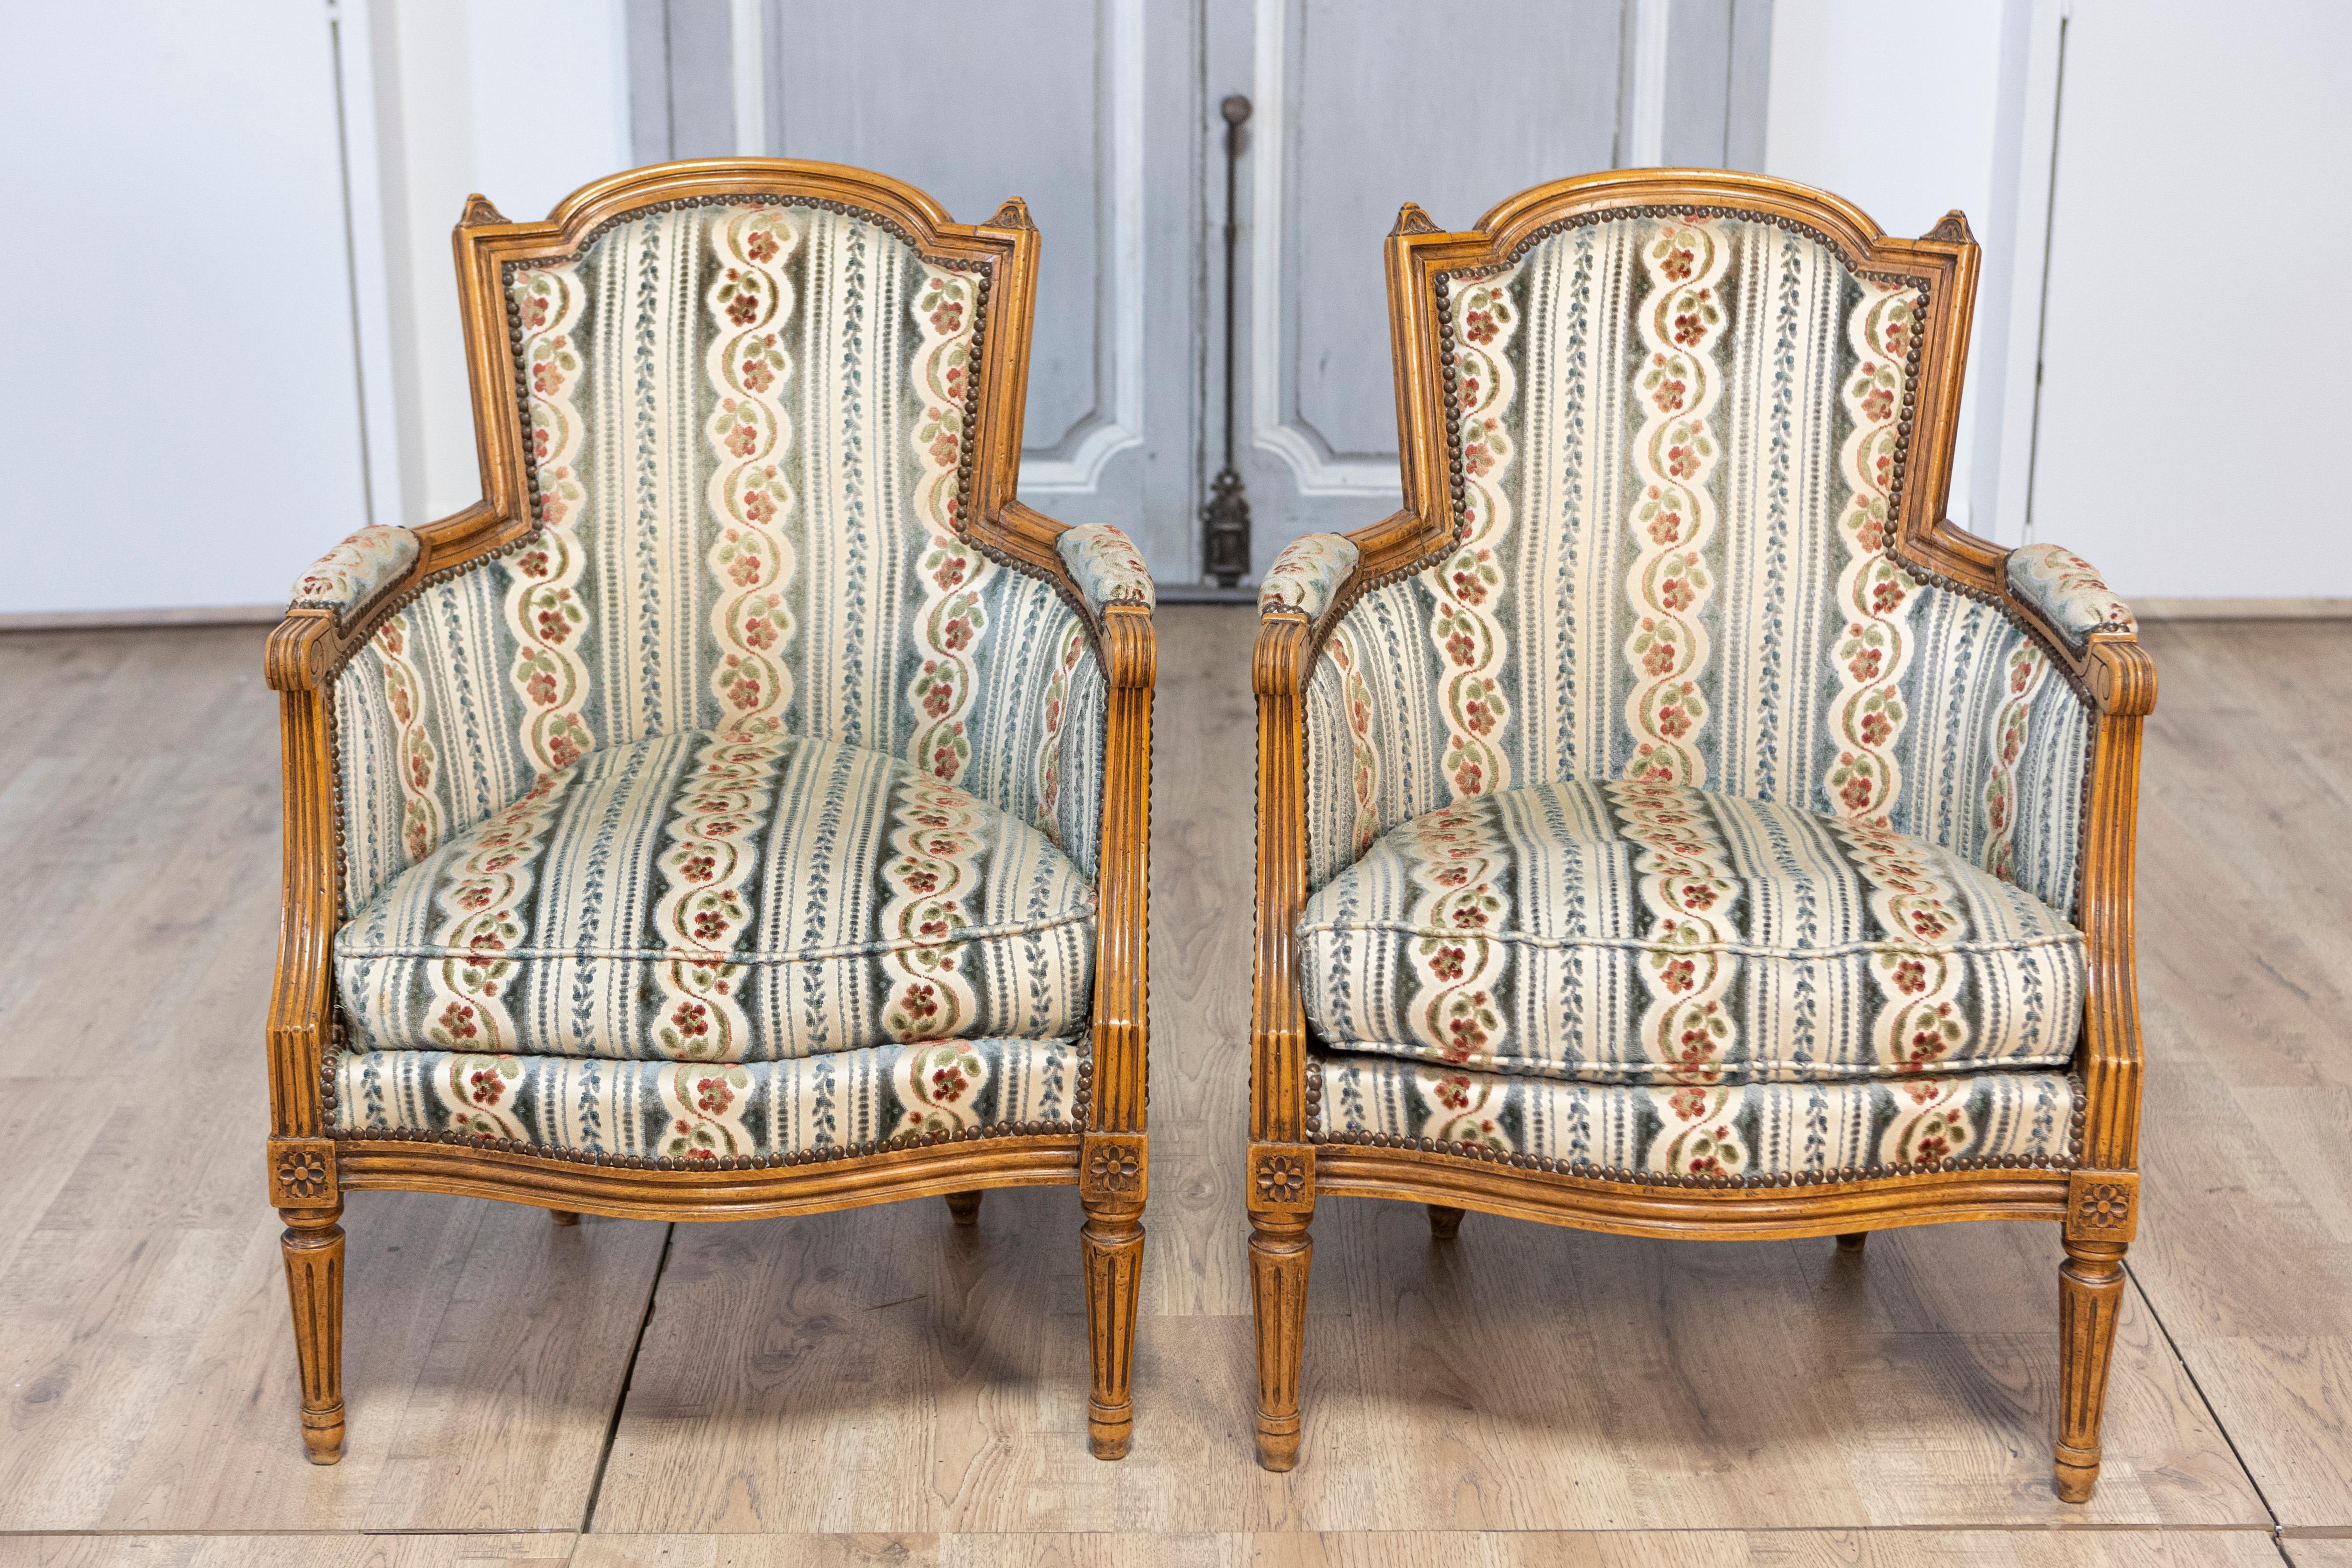 A pair of French Louis XVI style walnut bergères chairs from the 20th century with scrolling arms, carved rosettes and fluted legs. This exquisite pair of French Louis XVI style walnut bergères chairs from the 20th century embodies timeless elegance